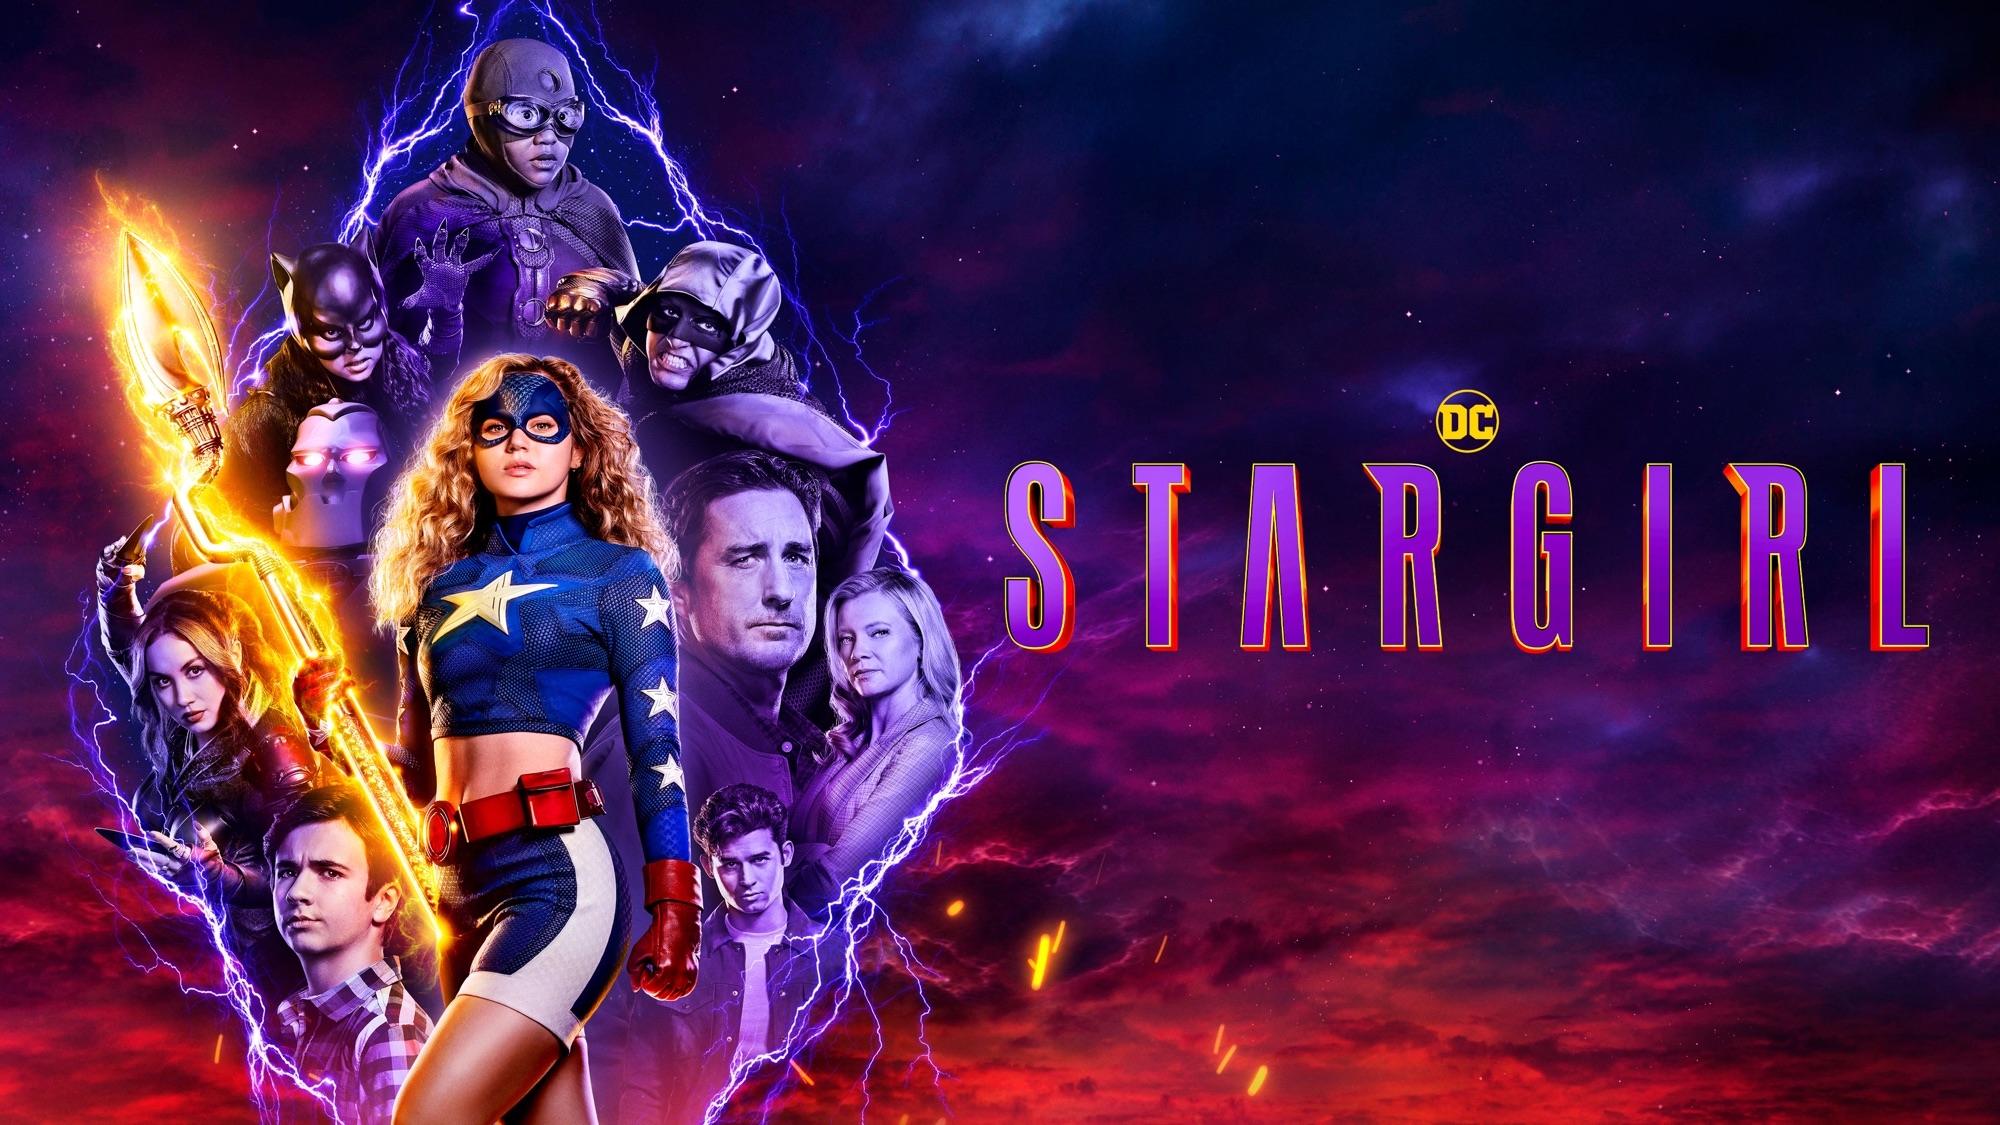 Stargirl Hd Dc Poster Wallpaper Hd Tv Series 4k Wallpapers Images And Background Wallpapers Den